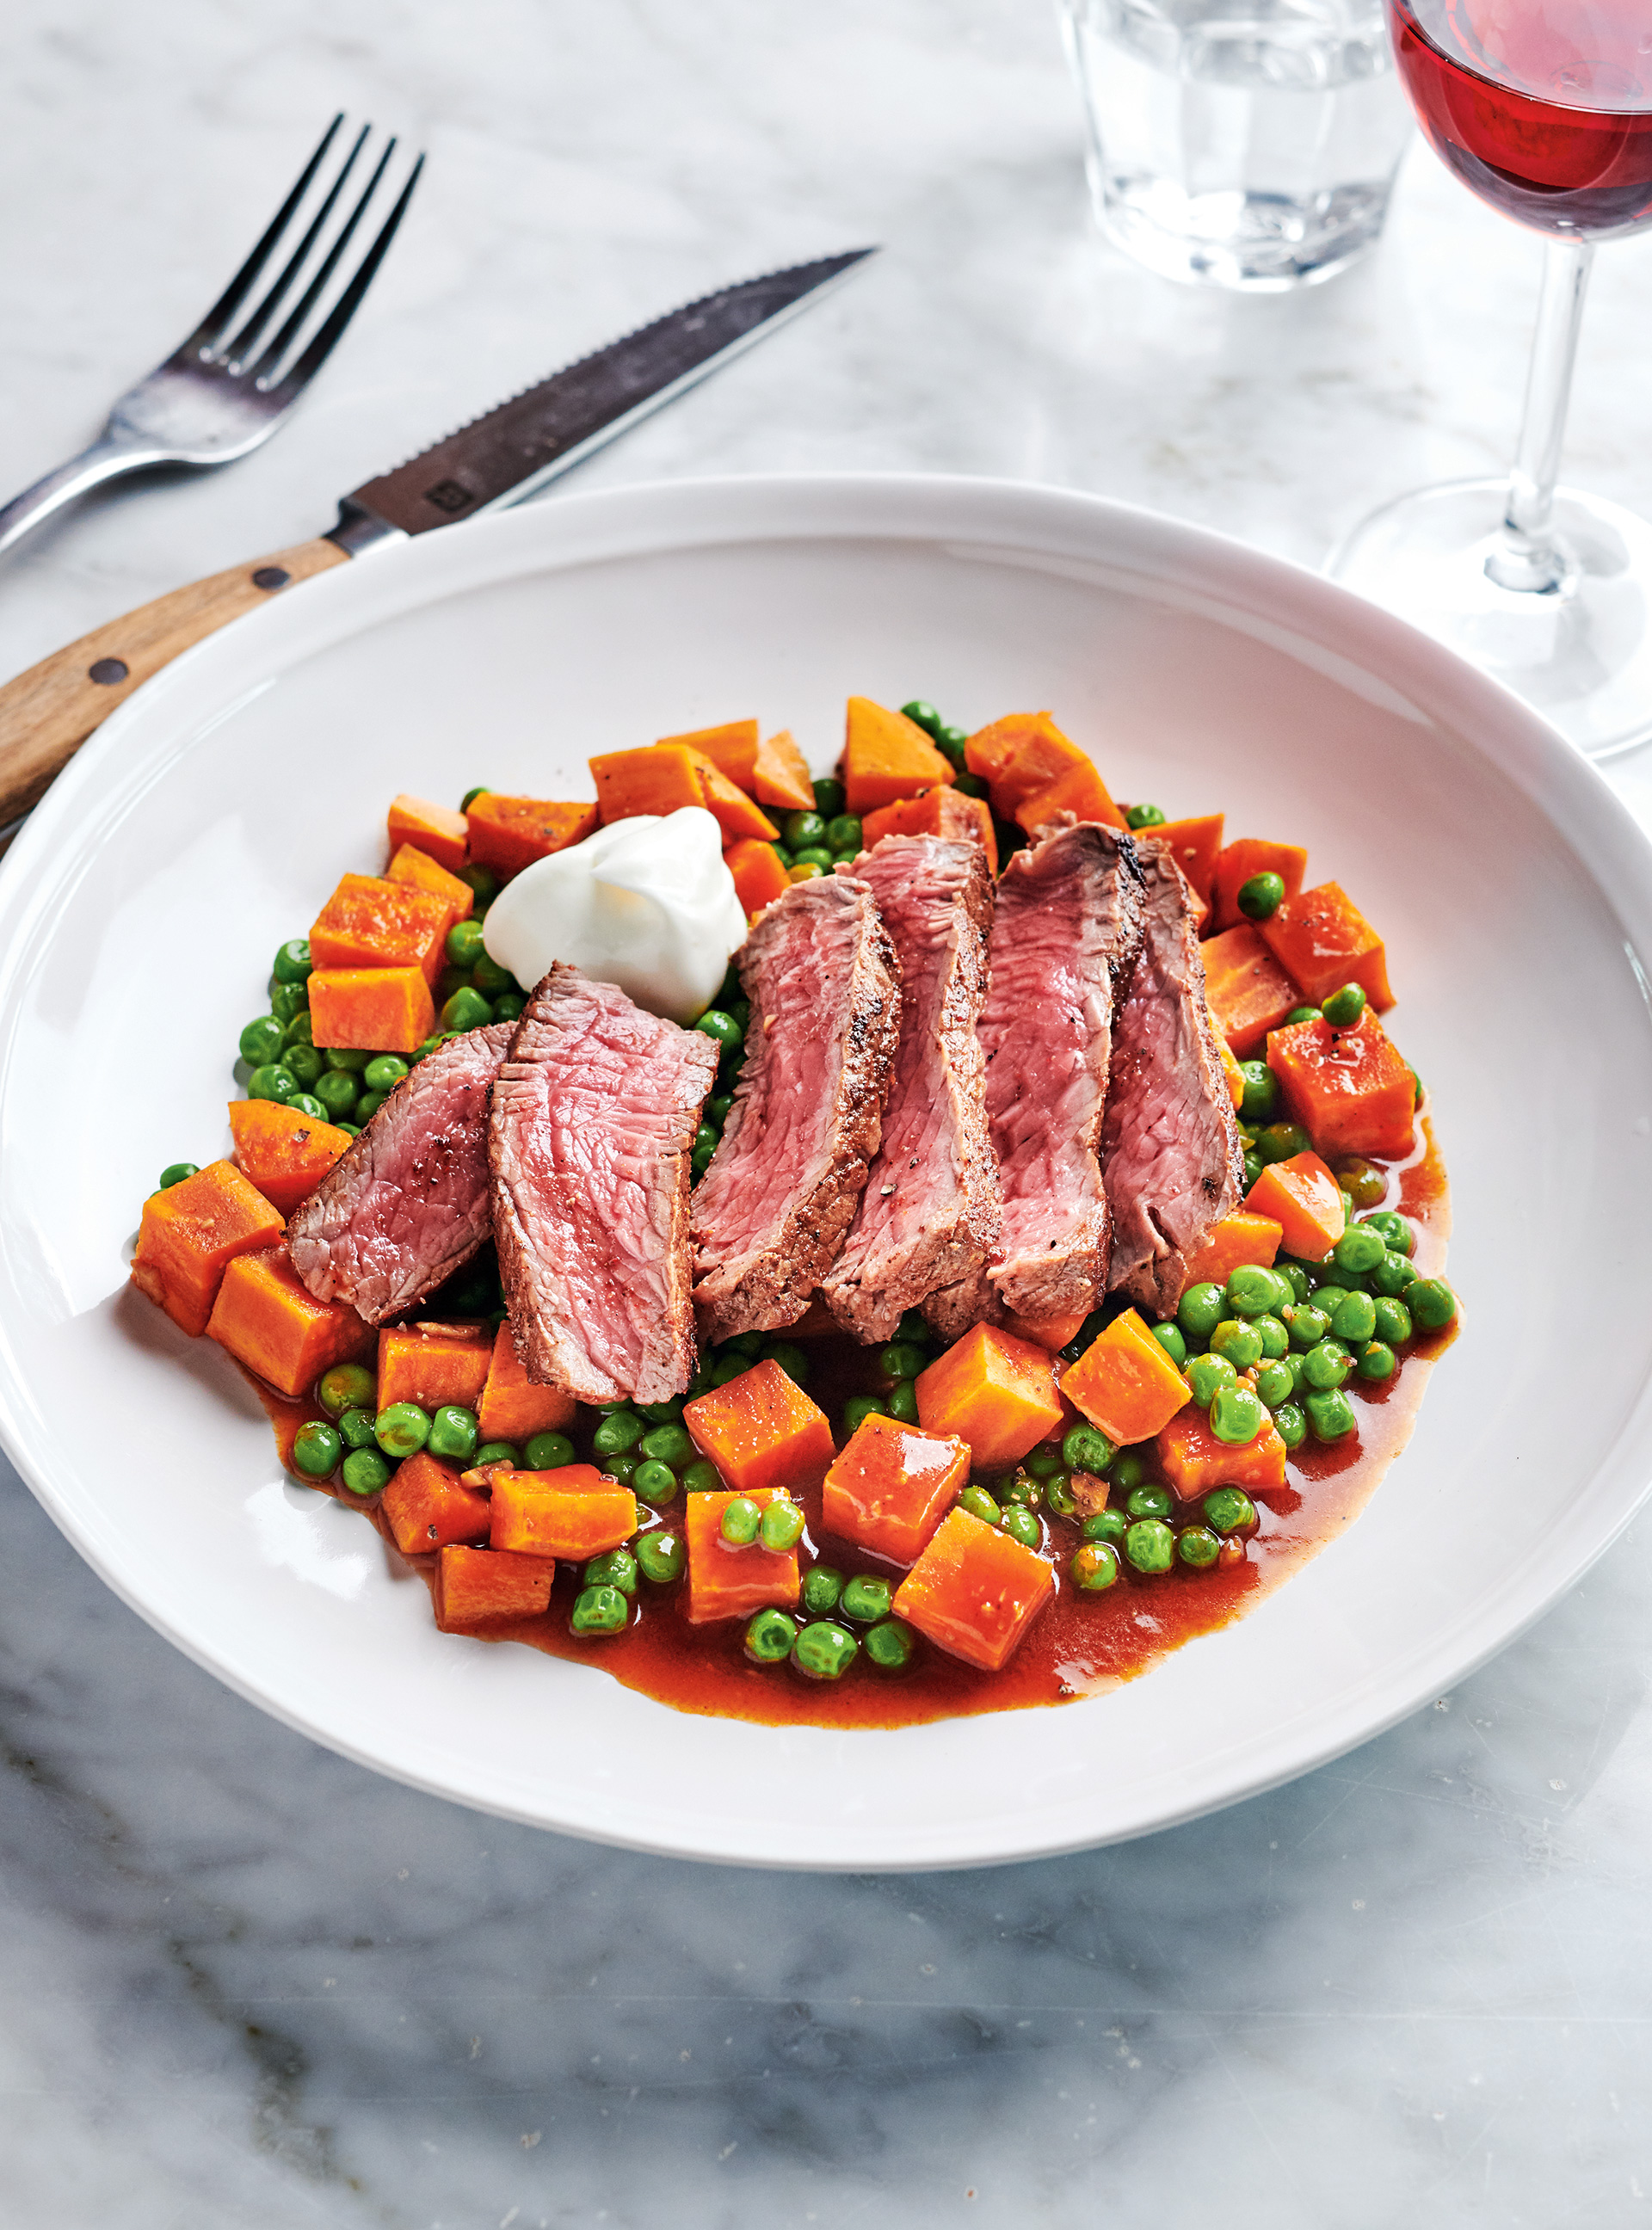 Top Sirloin Steaks with Peas and Sweet Potato